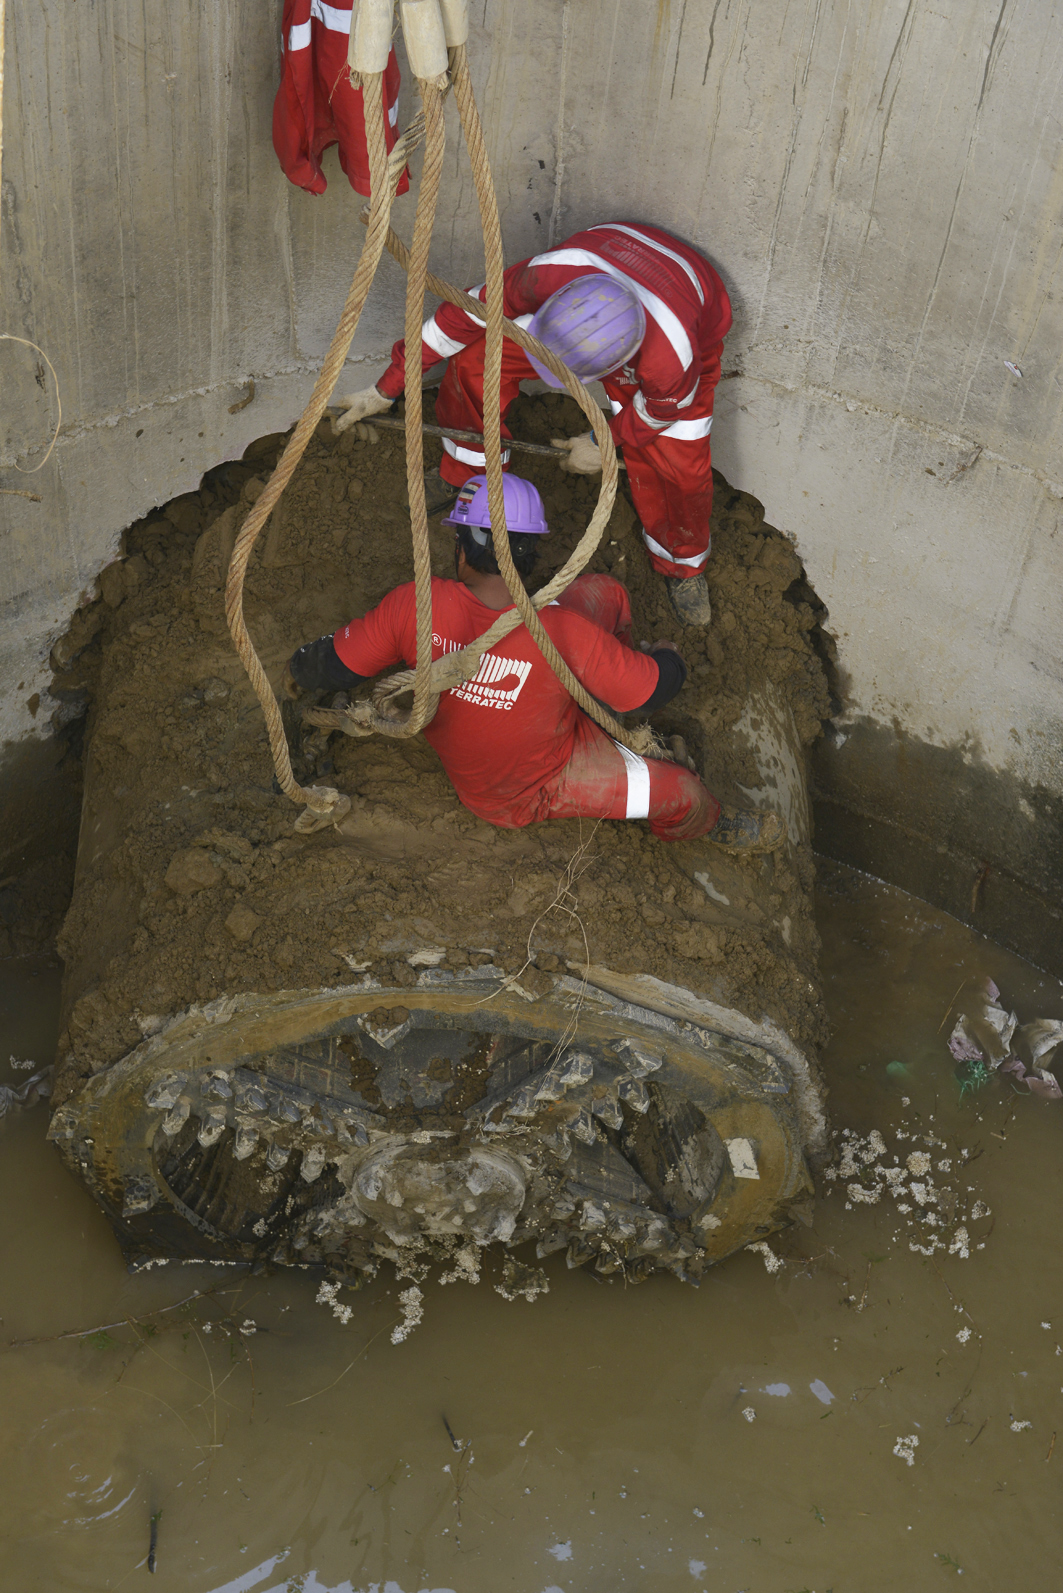 Tunneling engineers in Delhi, India